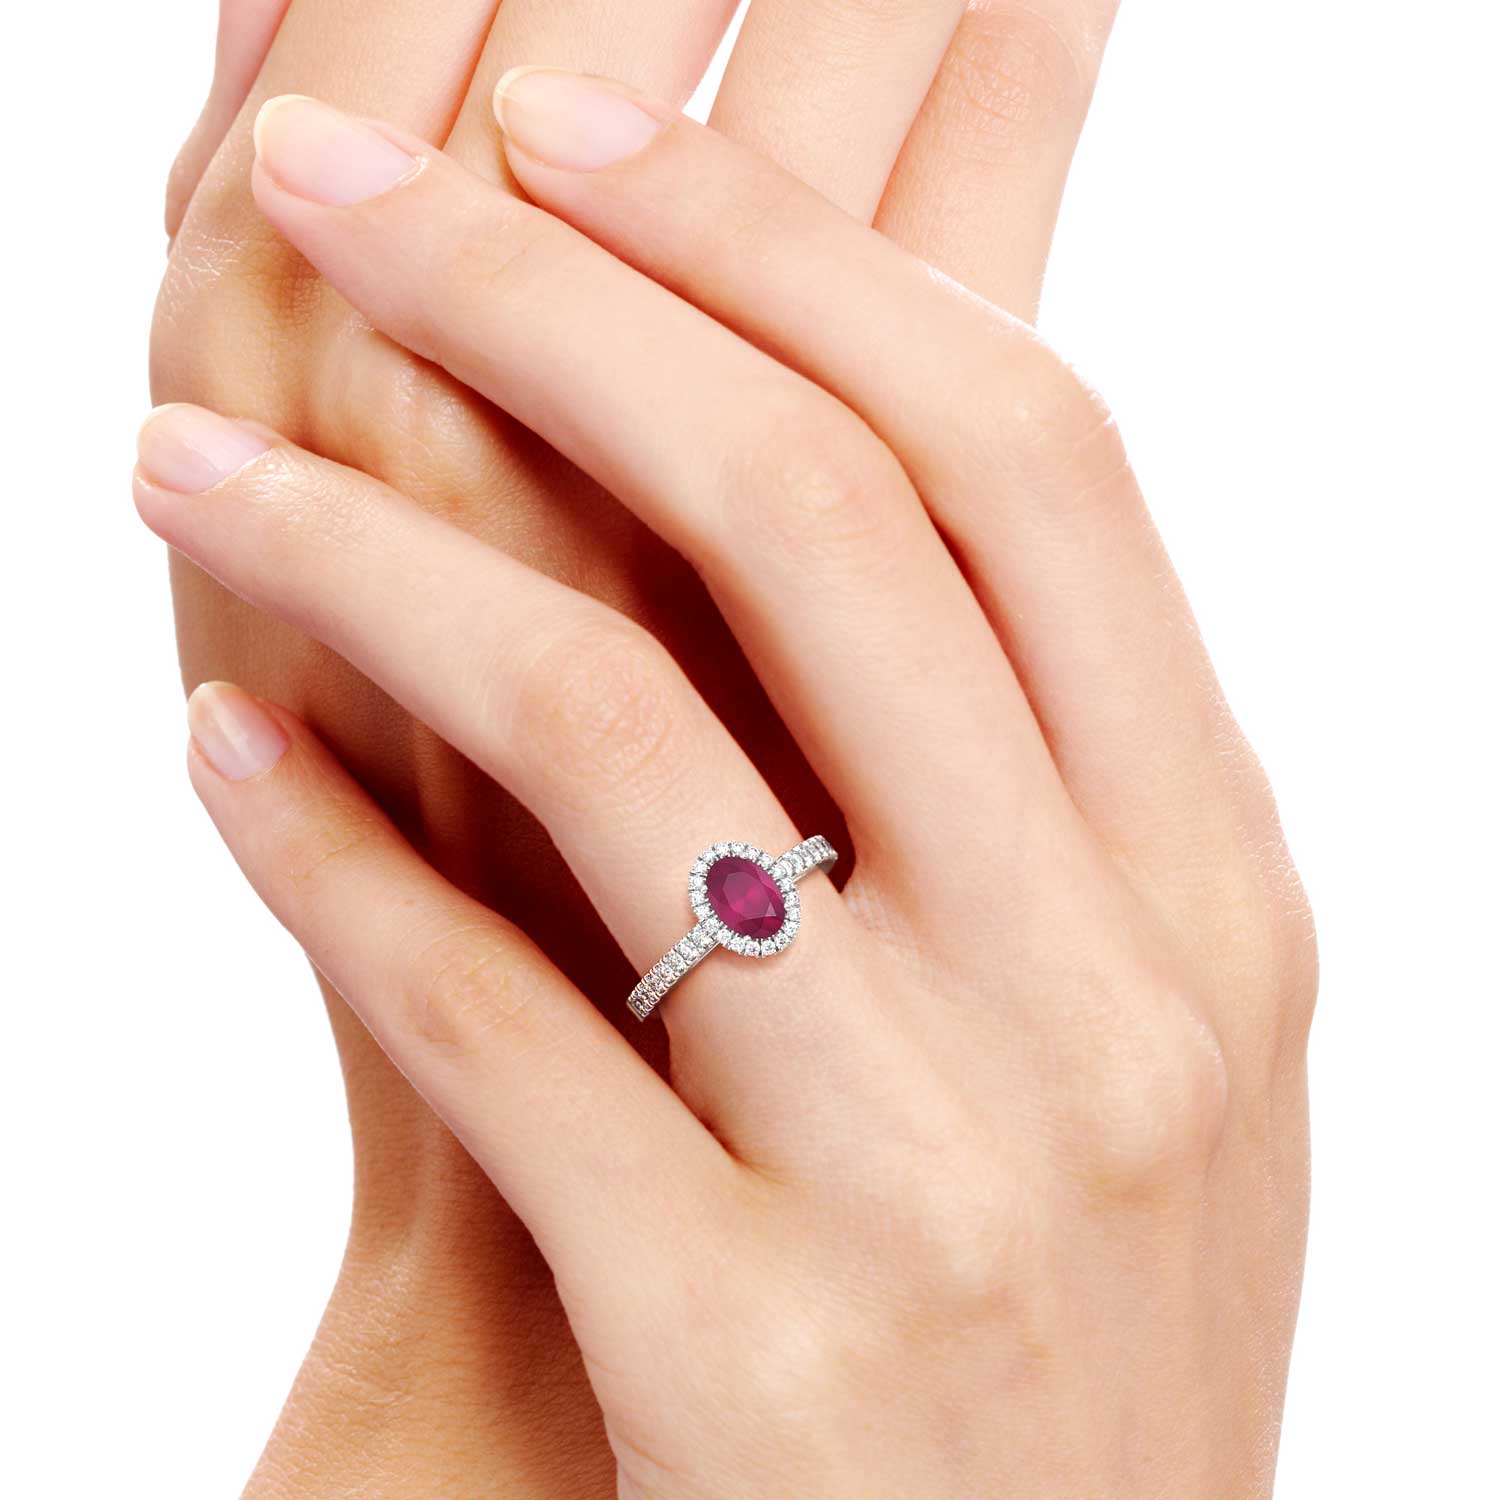 A vibrant ruby gemstone ring, showcasing its rich red hue and brilliant sparkle, elegantly worn on a finger.